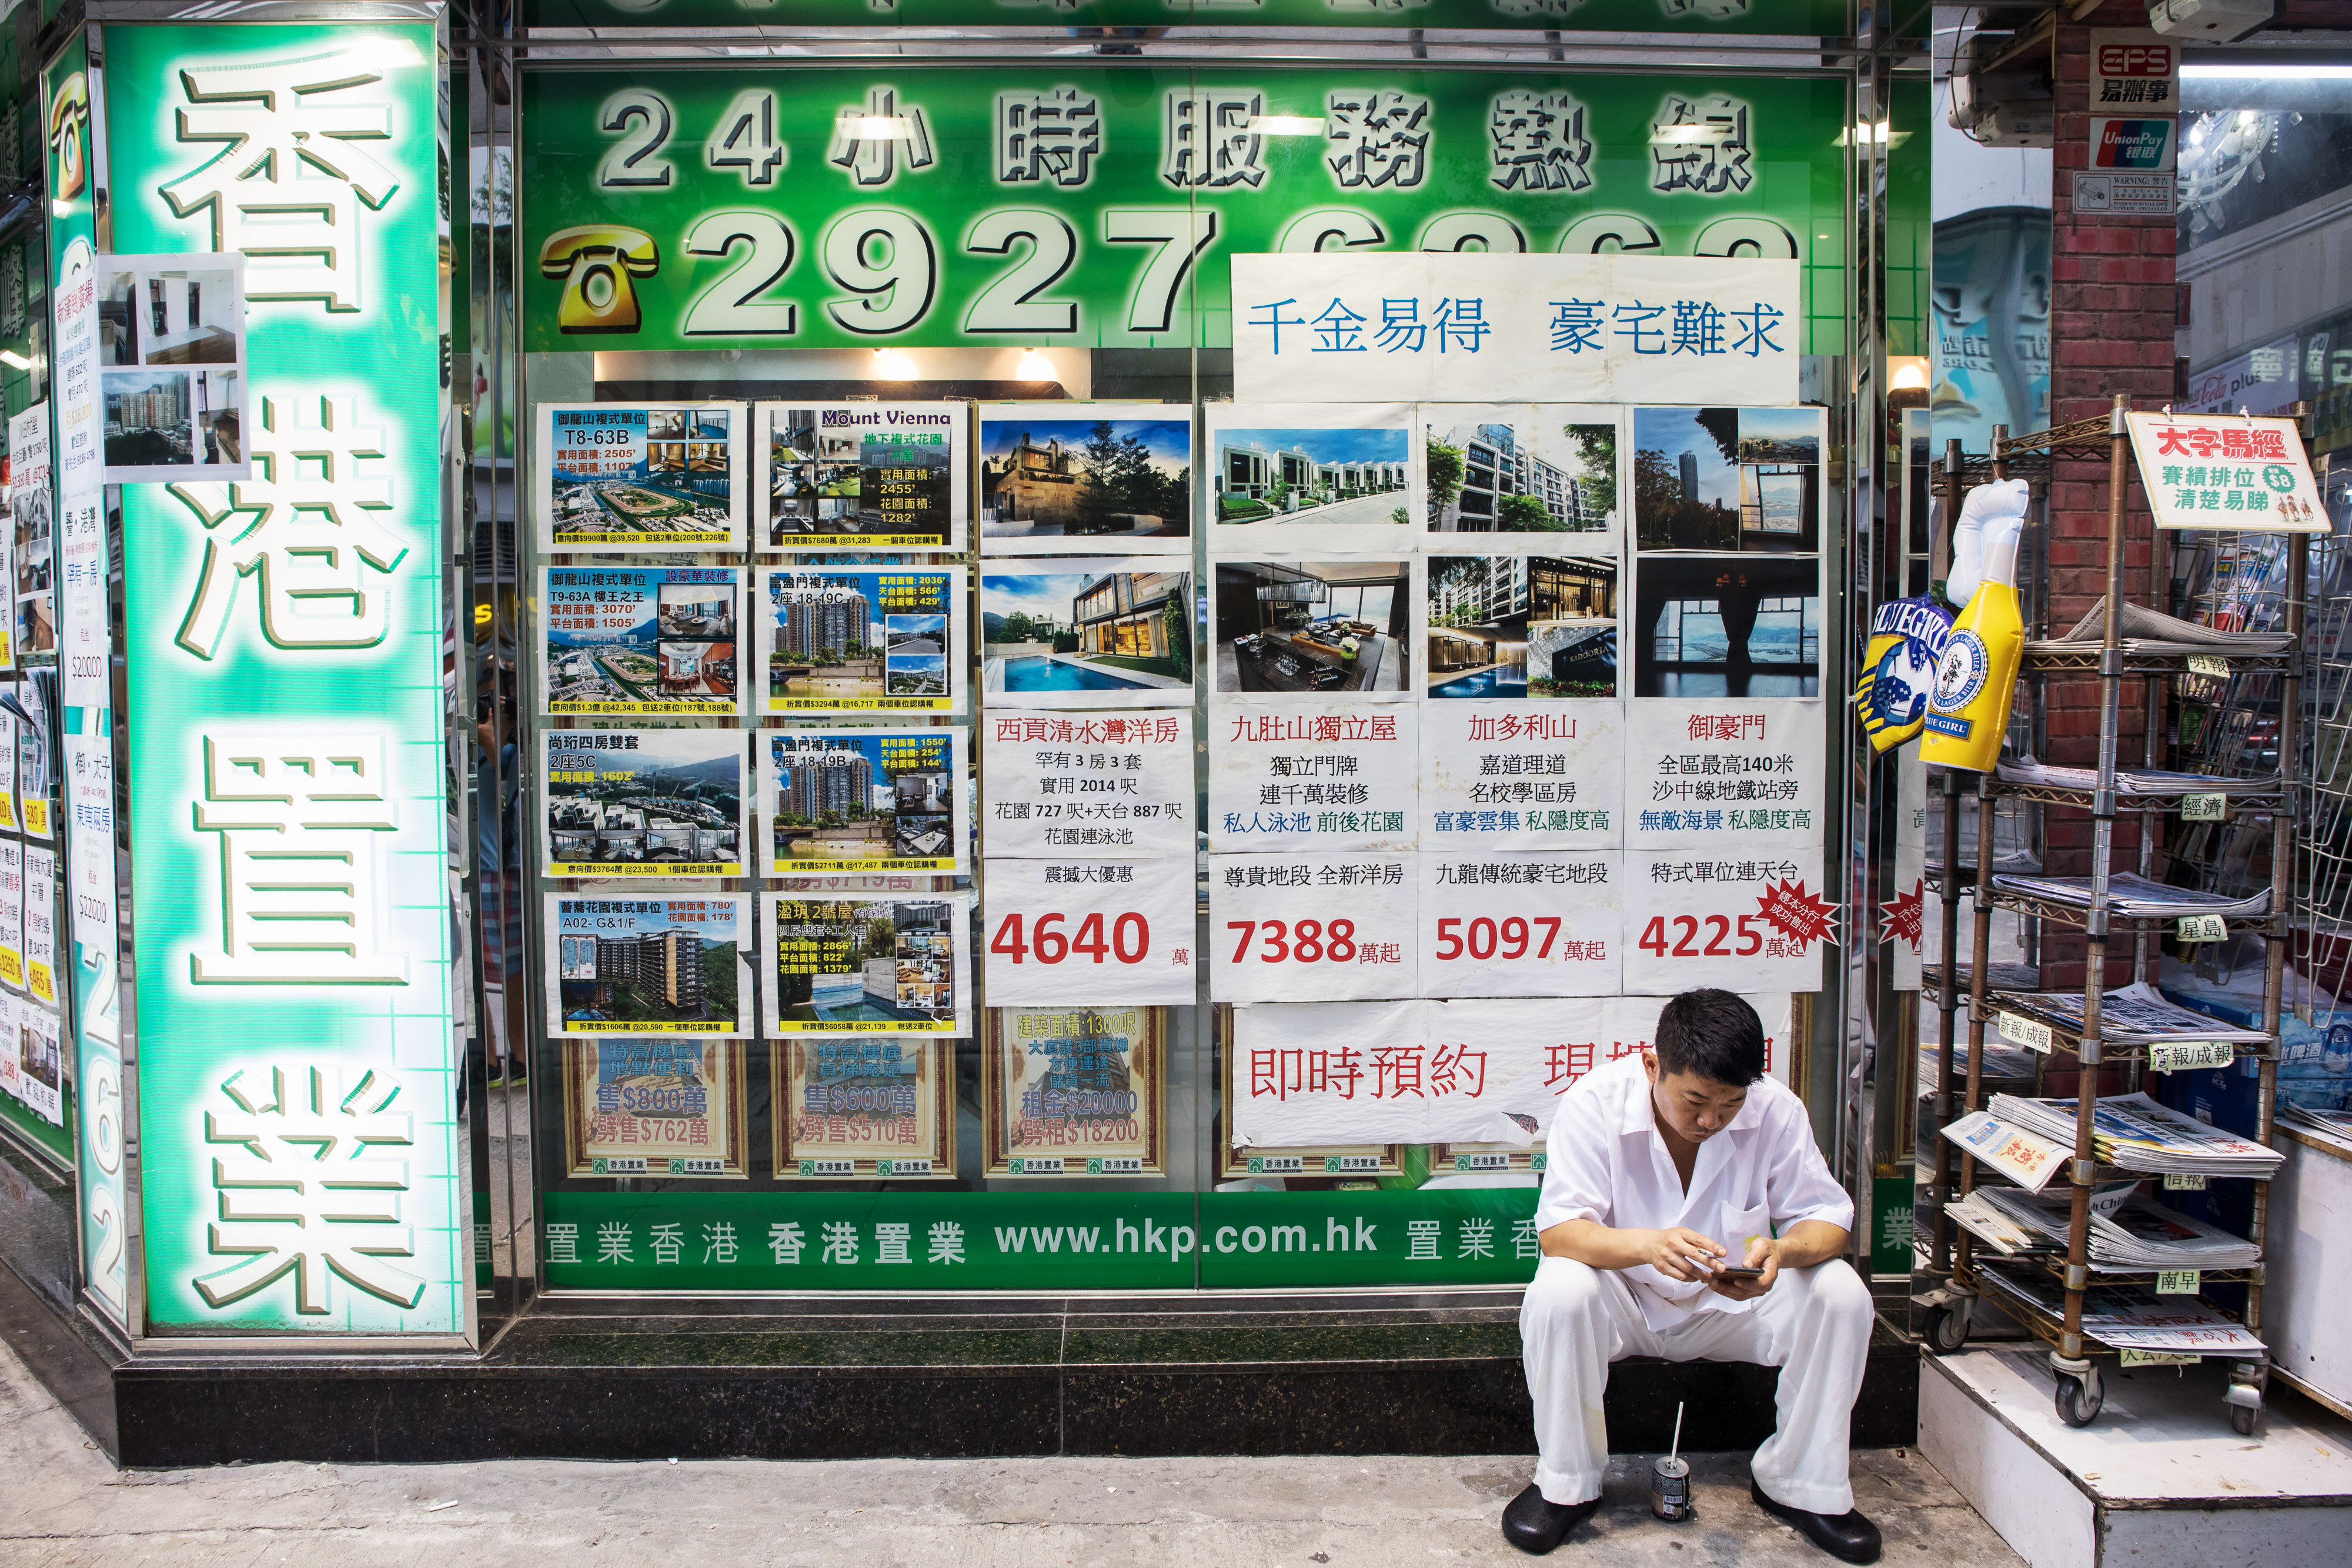 Listings displayed at the office of the Hong Kong Property Services Agency on July 21, 2018. Photo: Bloomberg